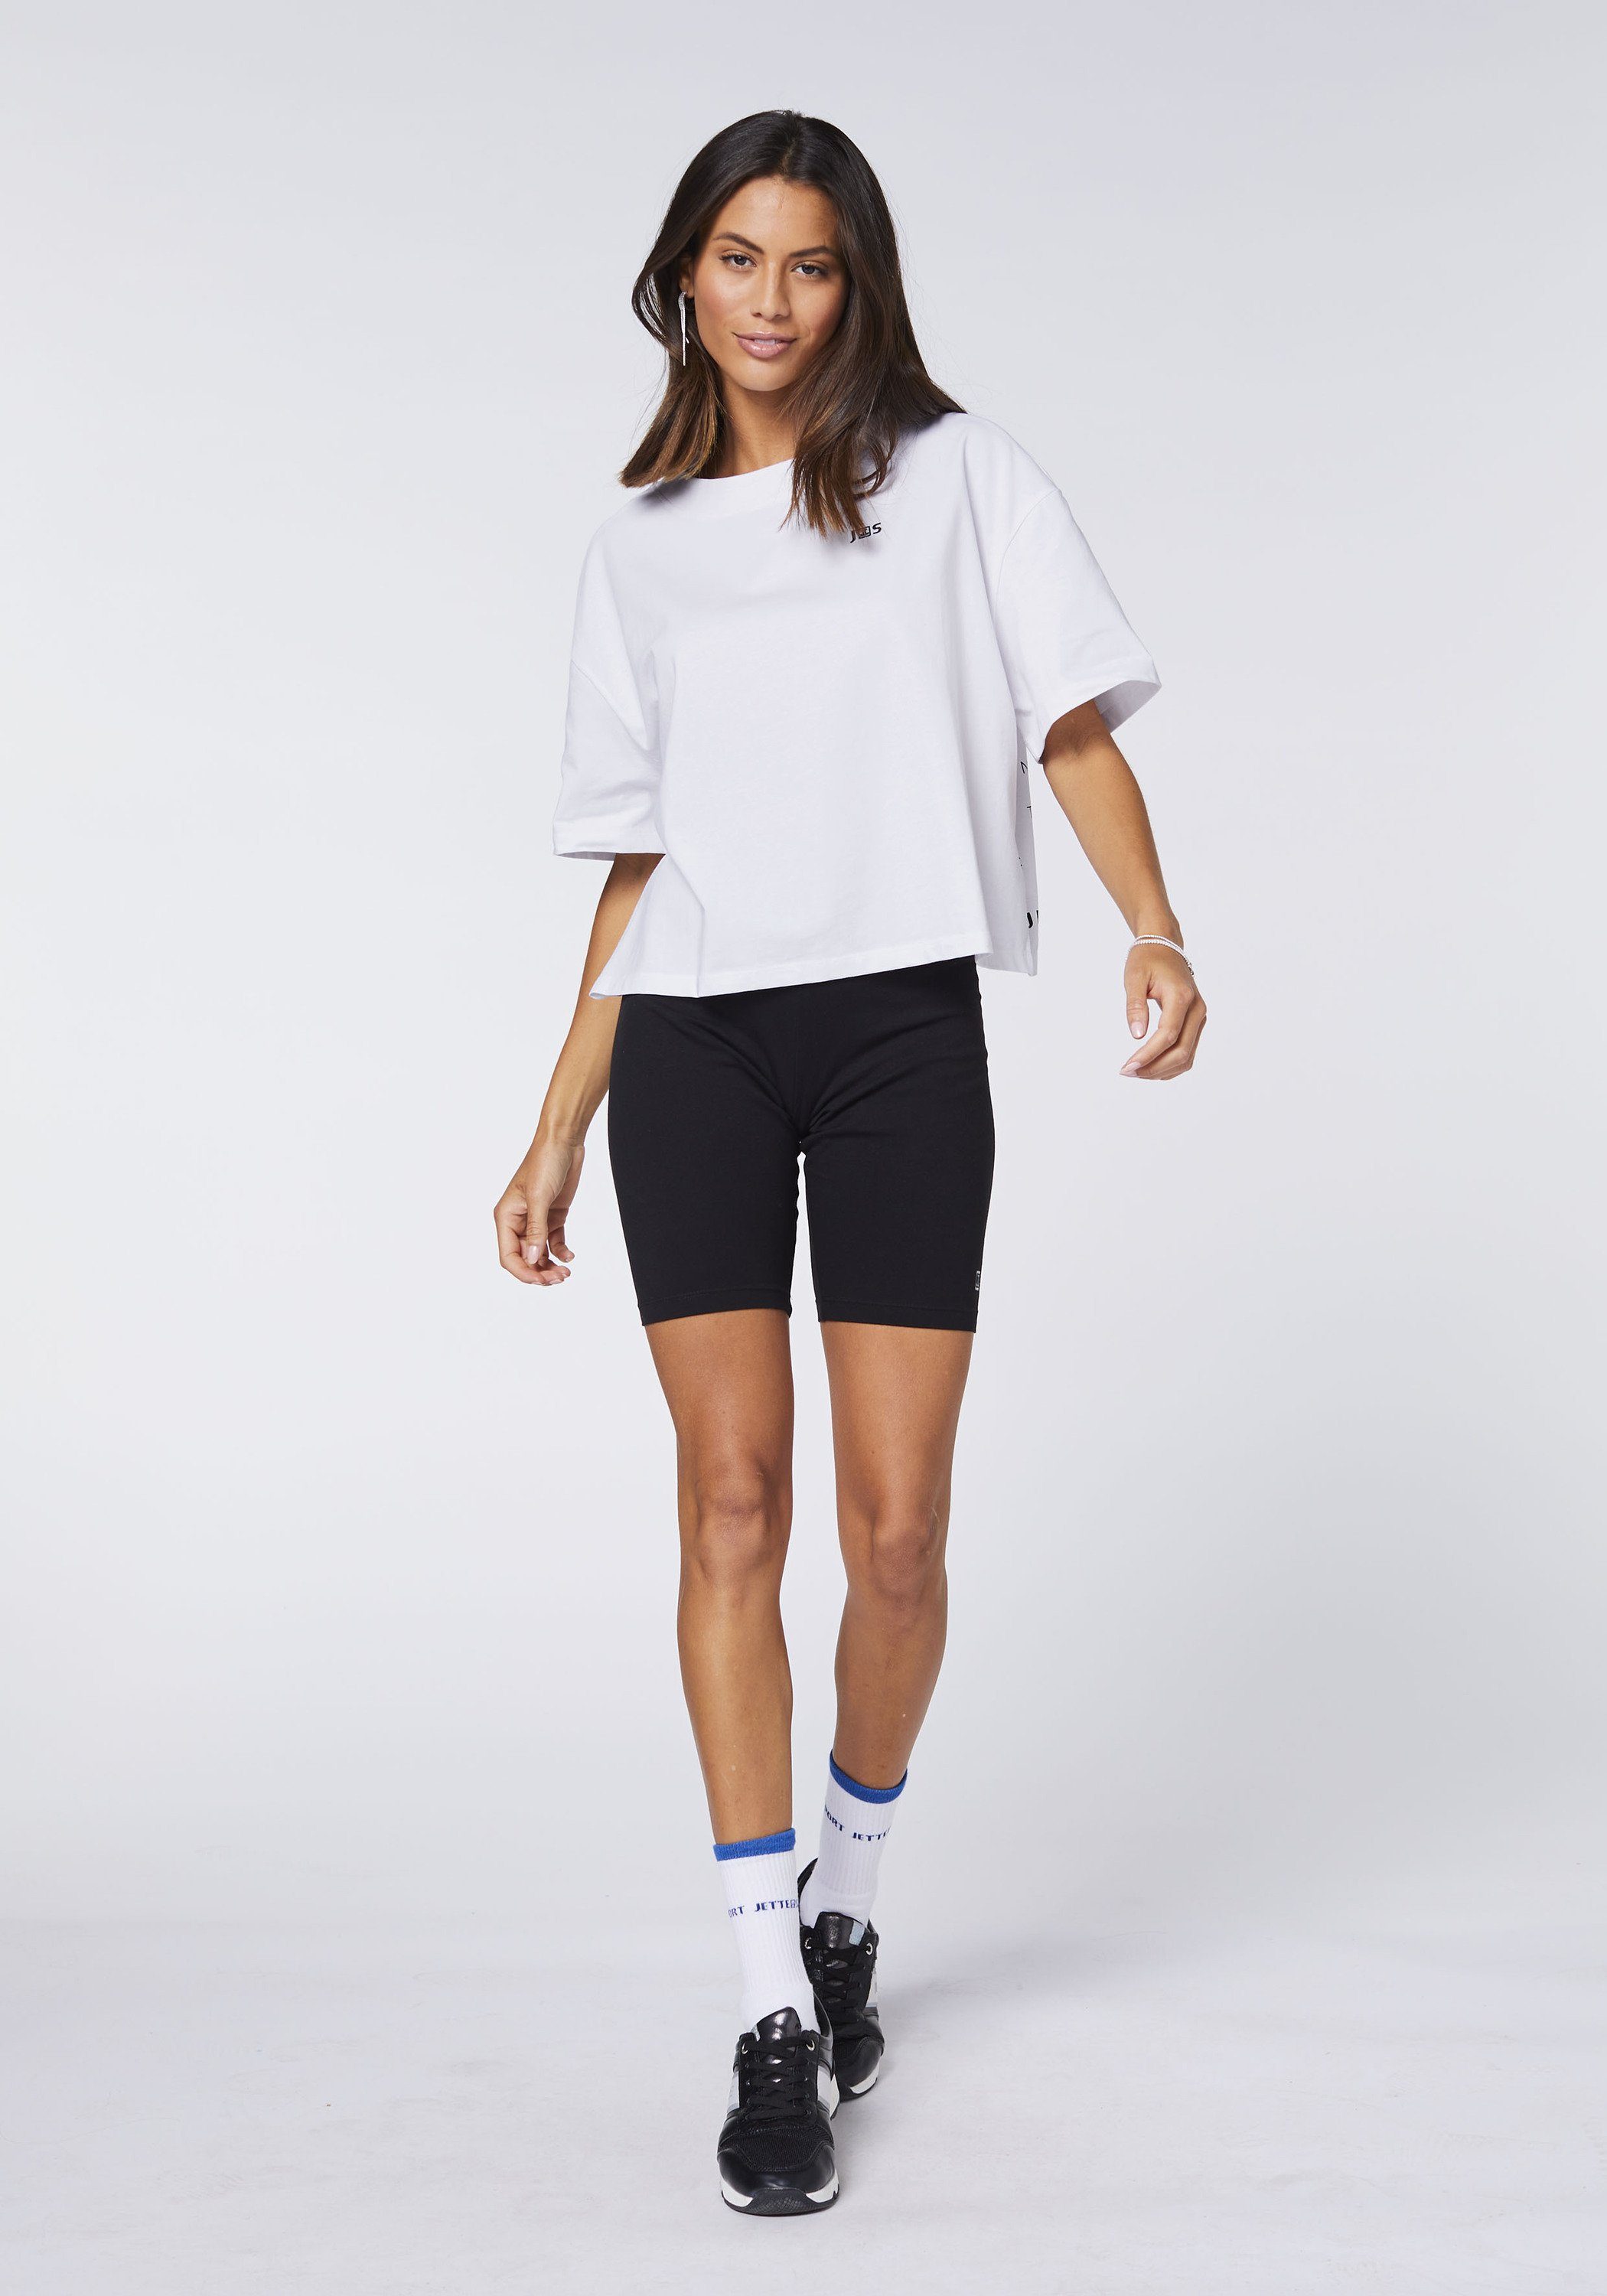 JETTE 11-0601 in SPORT White Bright Print-Shirt Länge cropped